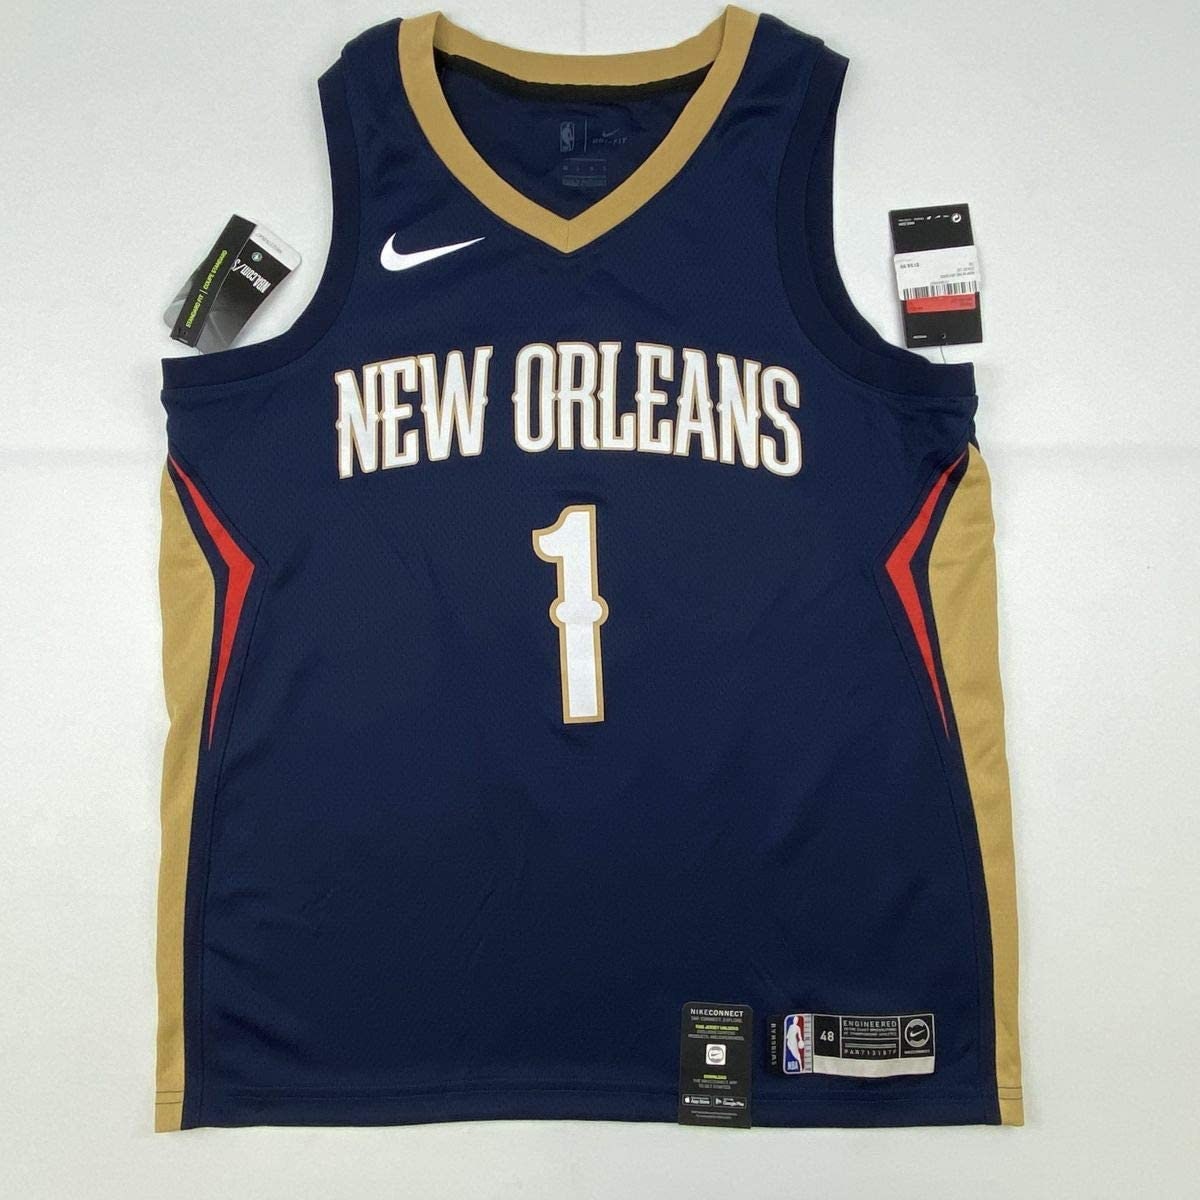 Autographed/Signed Zion Williamson New Orleans Pelicans White Swingman Nike Basketball  Jersey Fanatics COA at 's Sports Collectibles Store